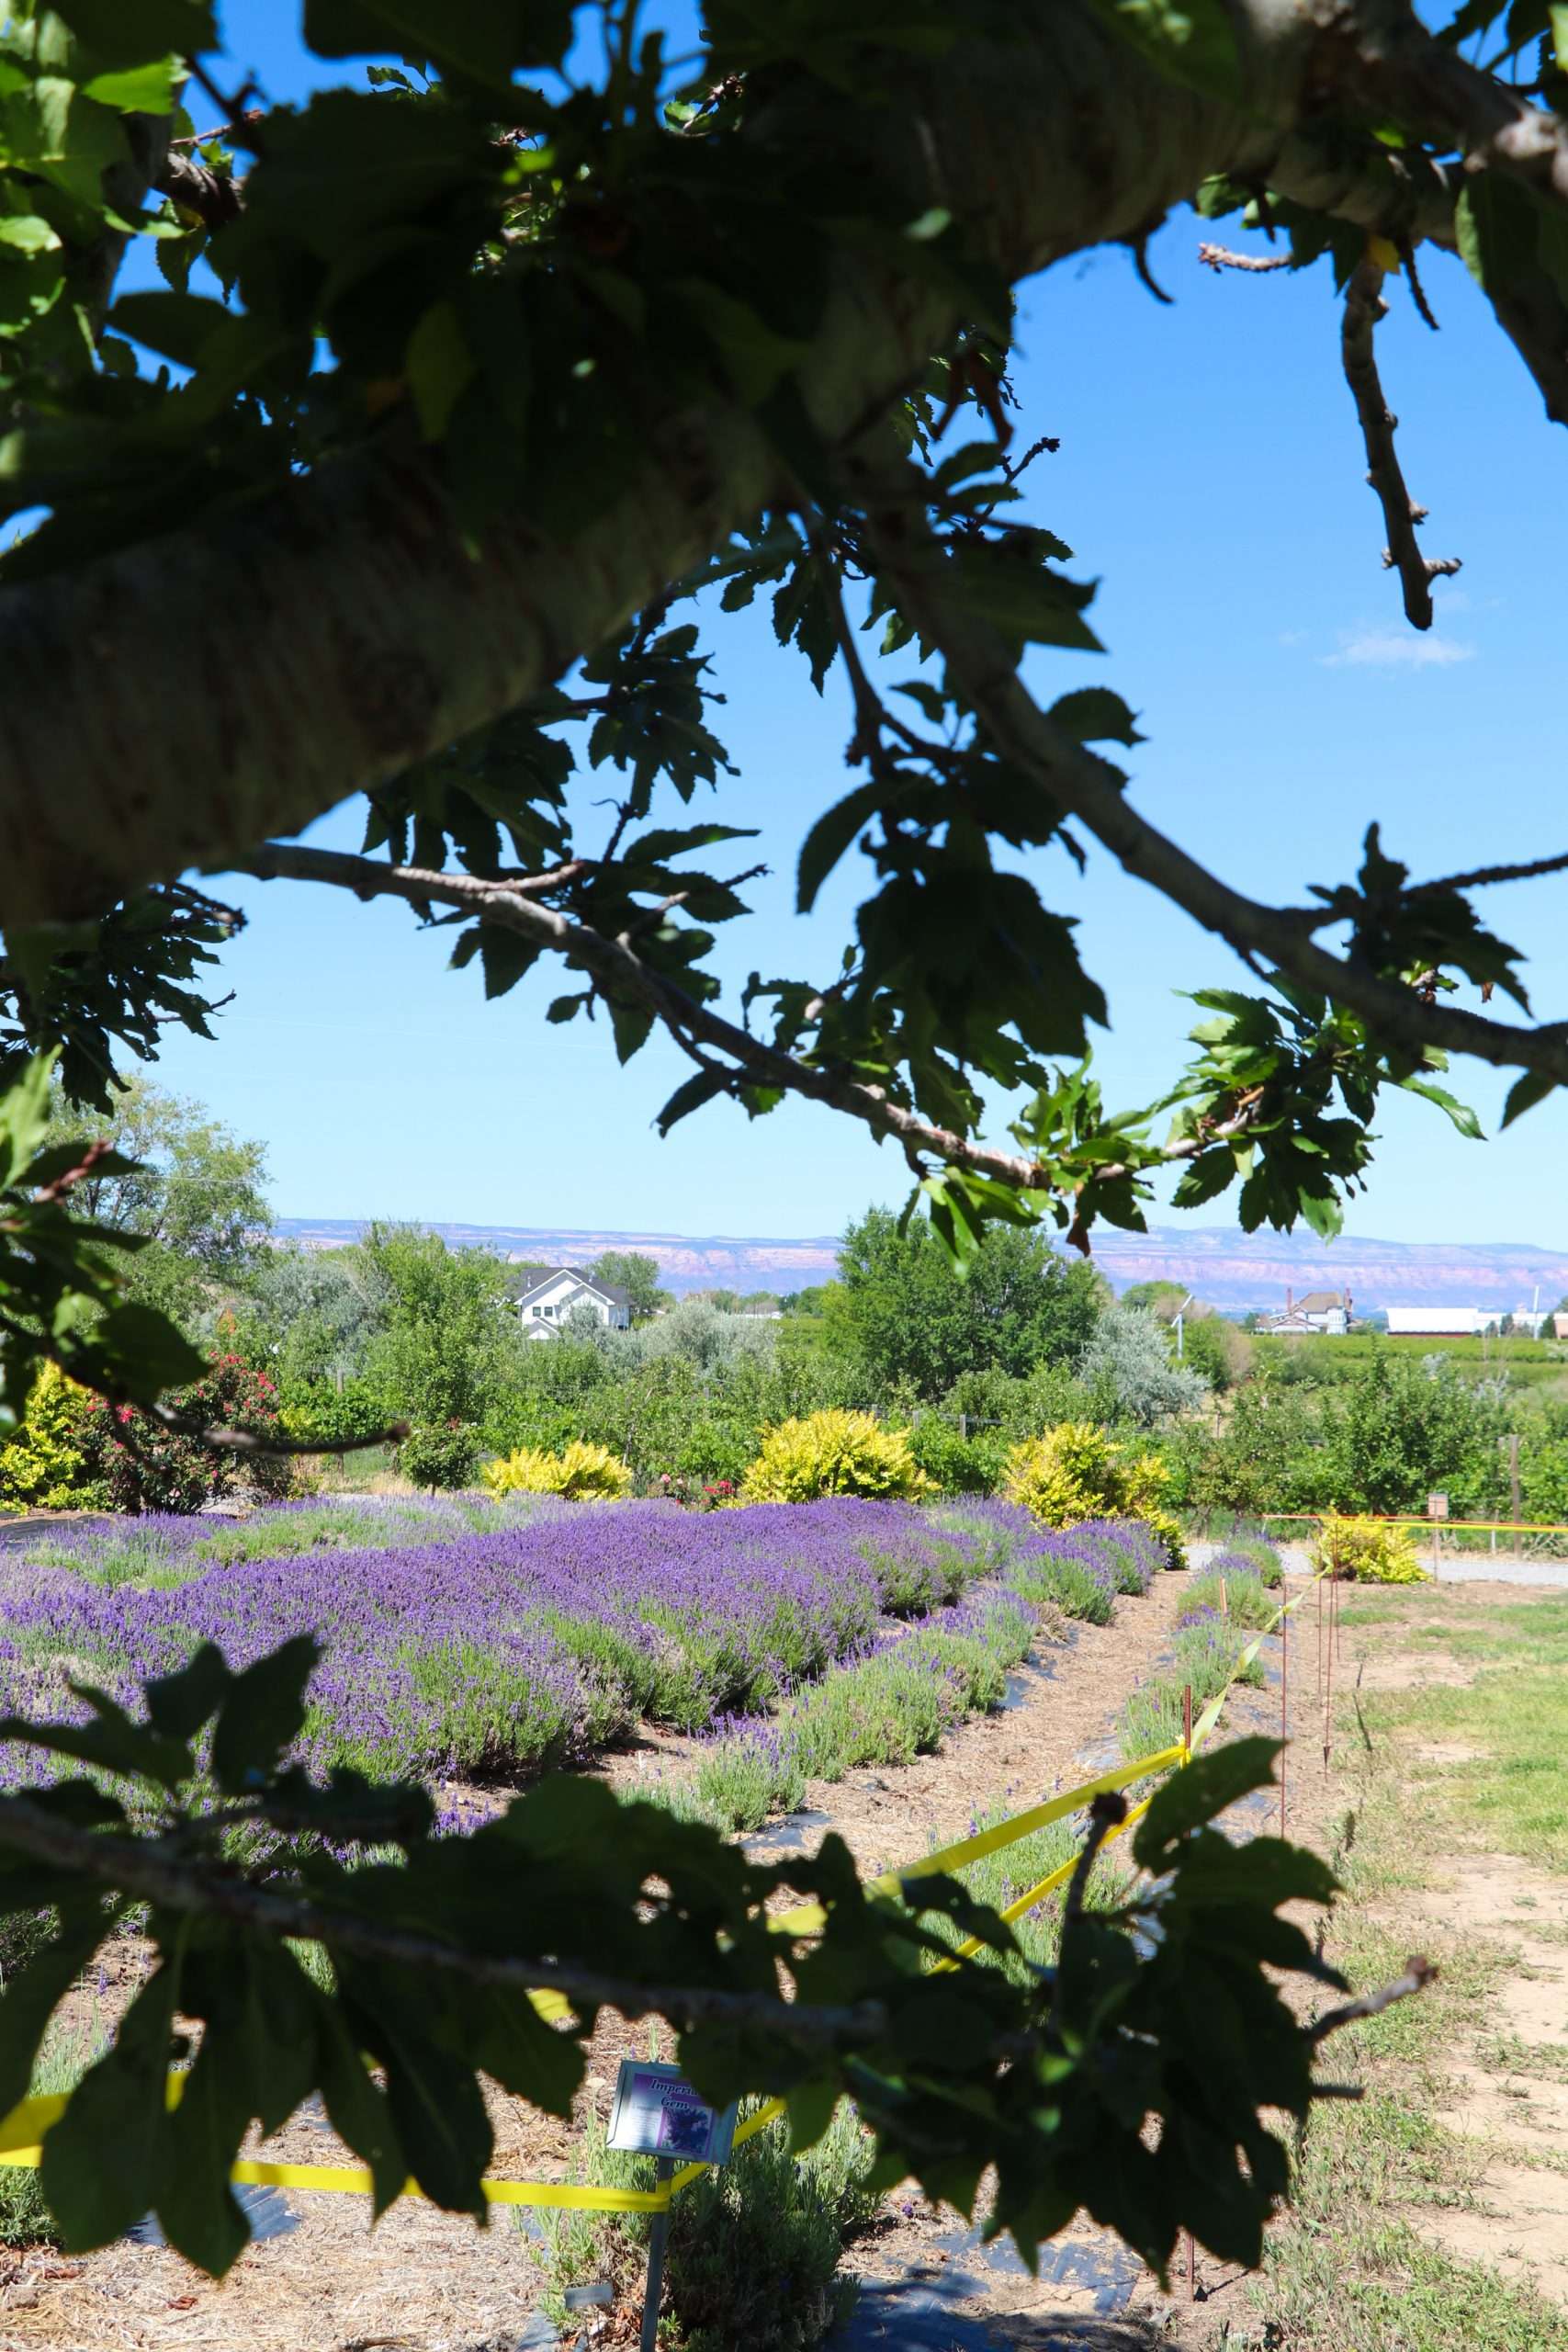 Indulge in the Colorado Lavender Festival in Palisade, CO Applied